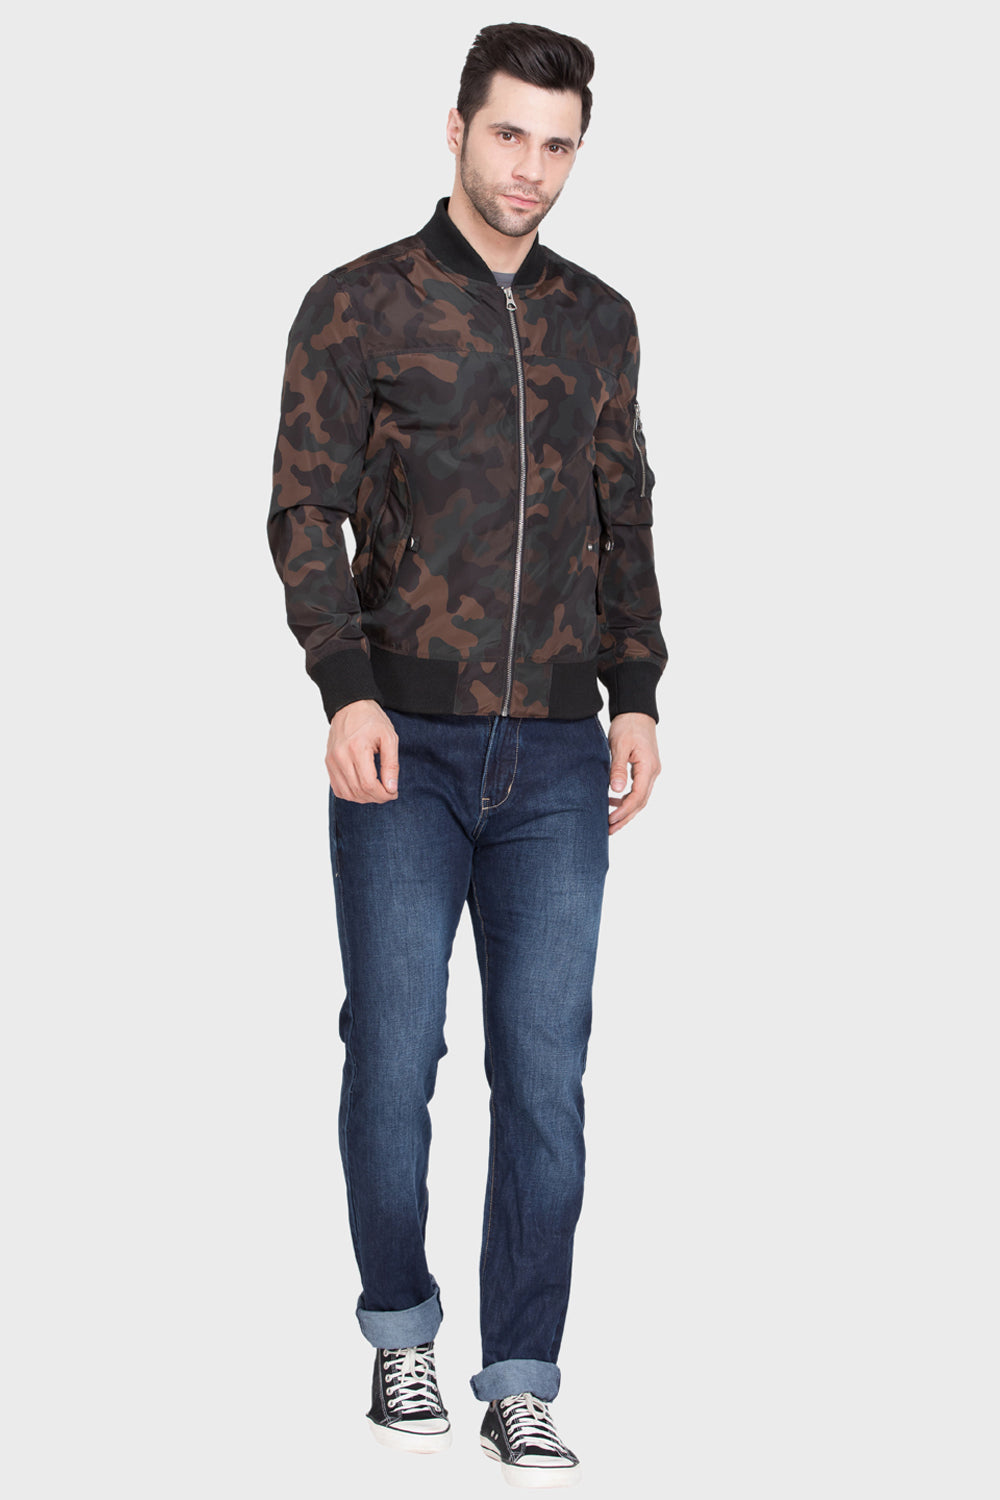 Justanned Camo Bomber Jacket